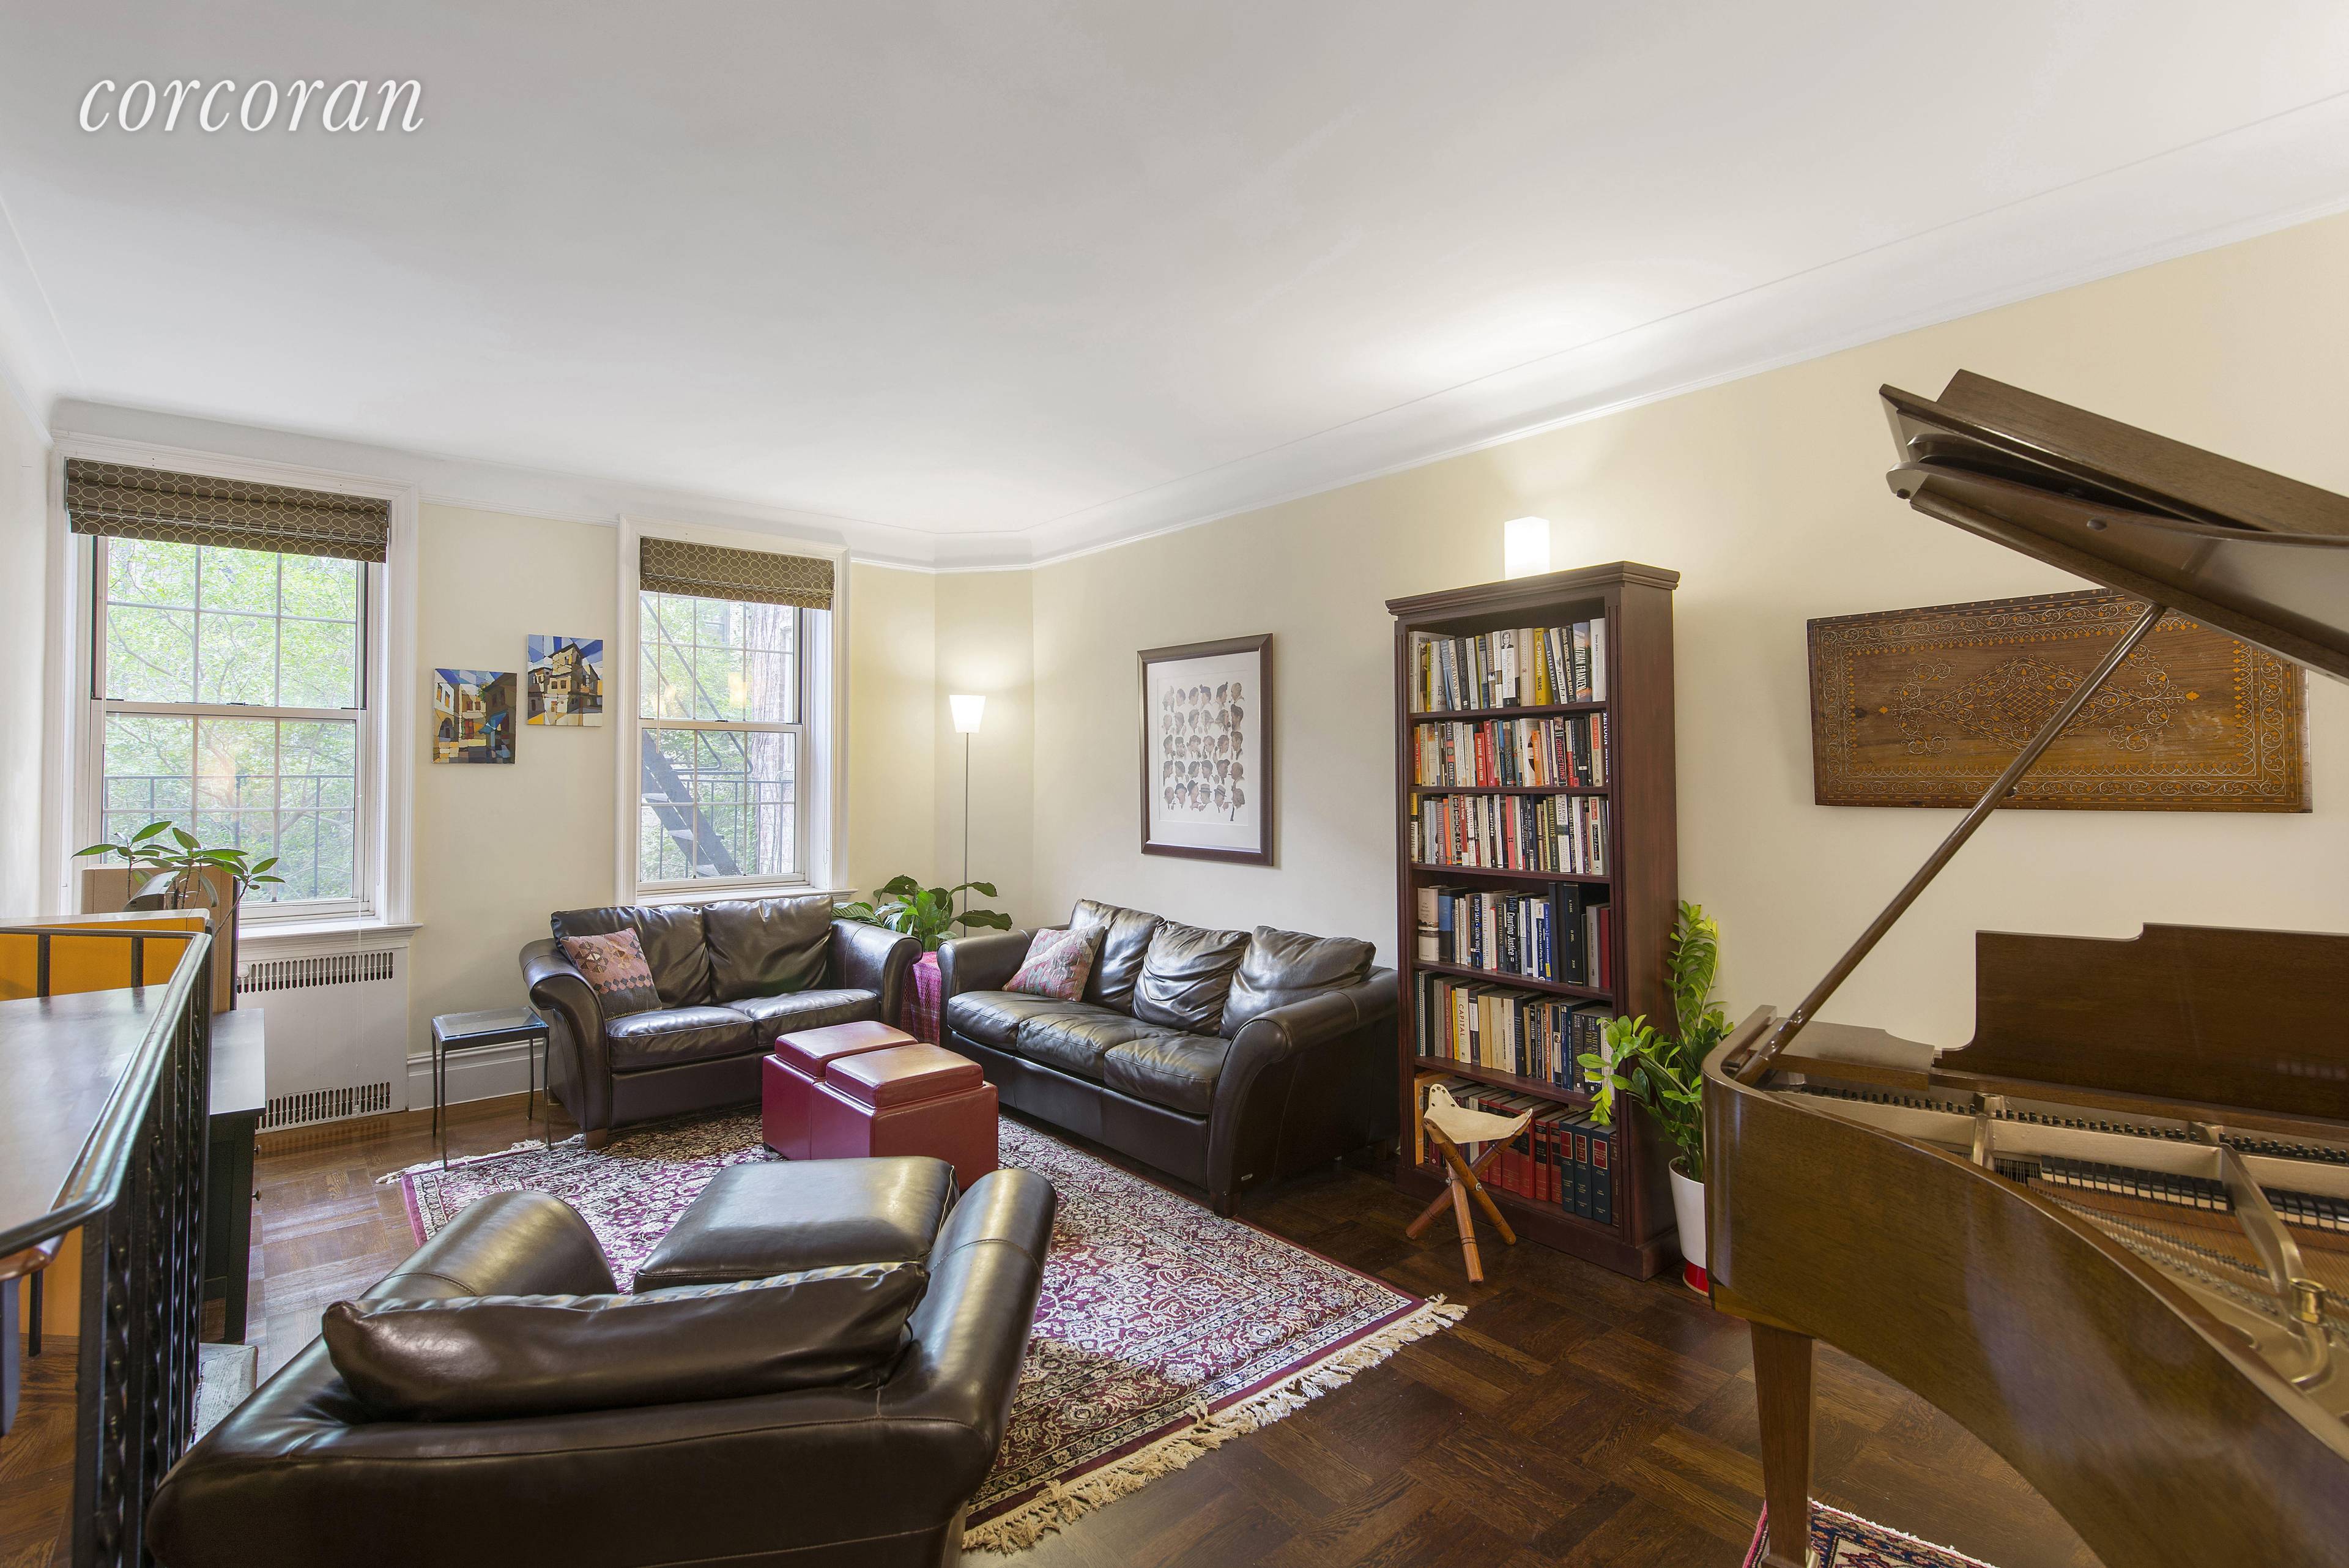 SIMPLY GORGEOUS ! Are you looking for a very spacious, elegant, and ever so quiet one bedroom apartment in one of the most coveted, prewar, doorman buildings in prime Brooklyn ...